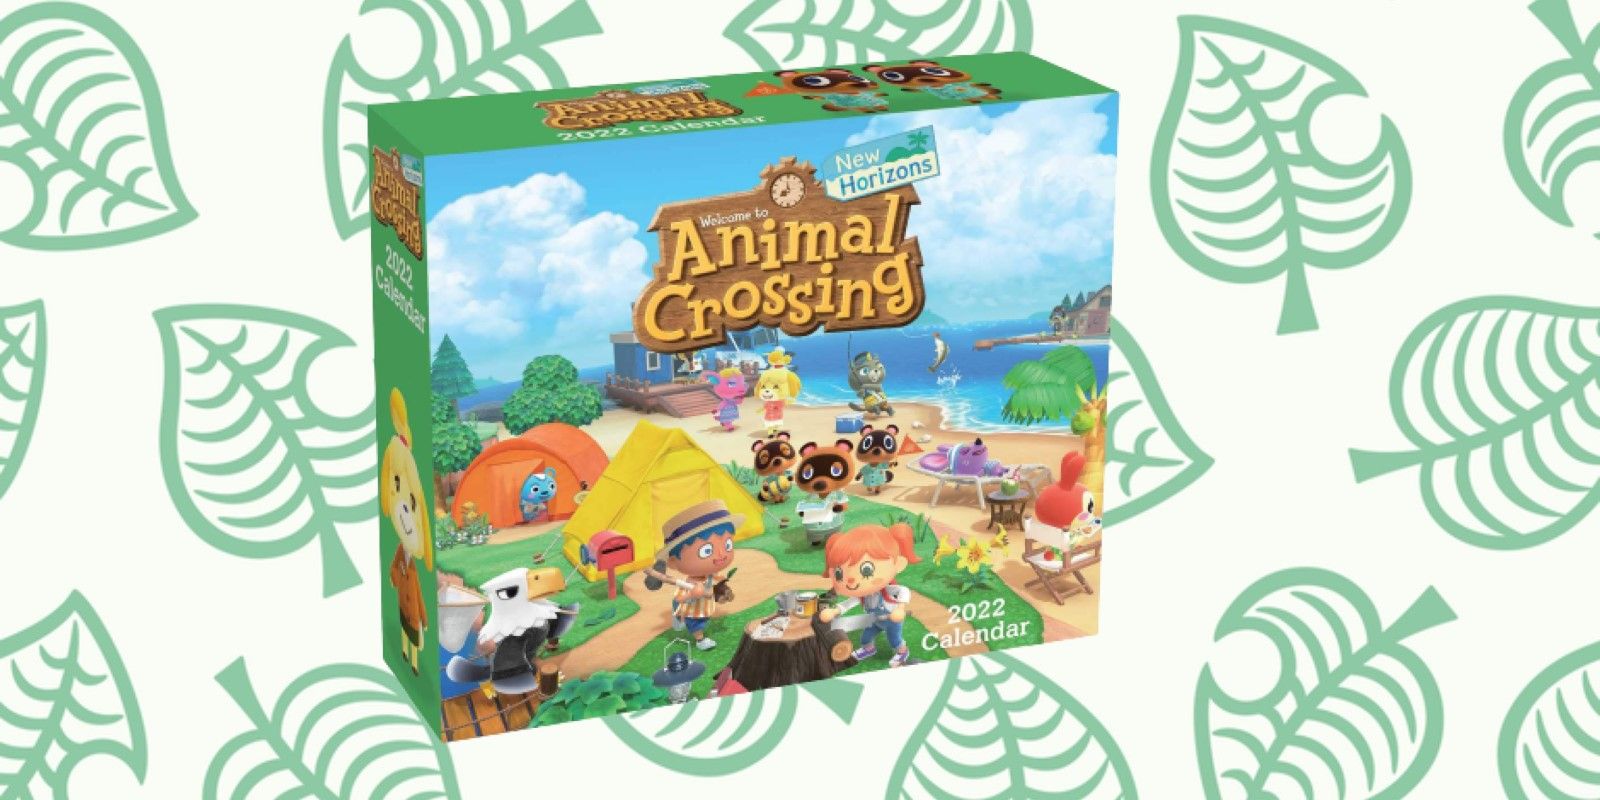 9 Best Holiday Gift Ideas For Animal Crossing Fans